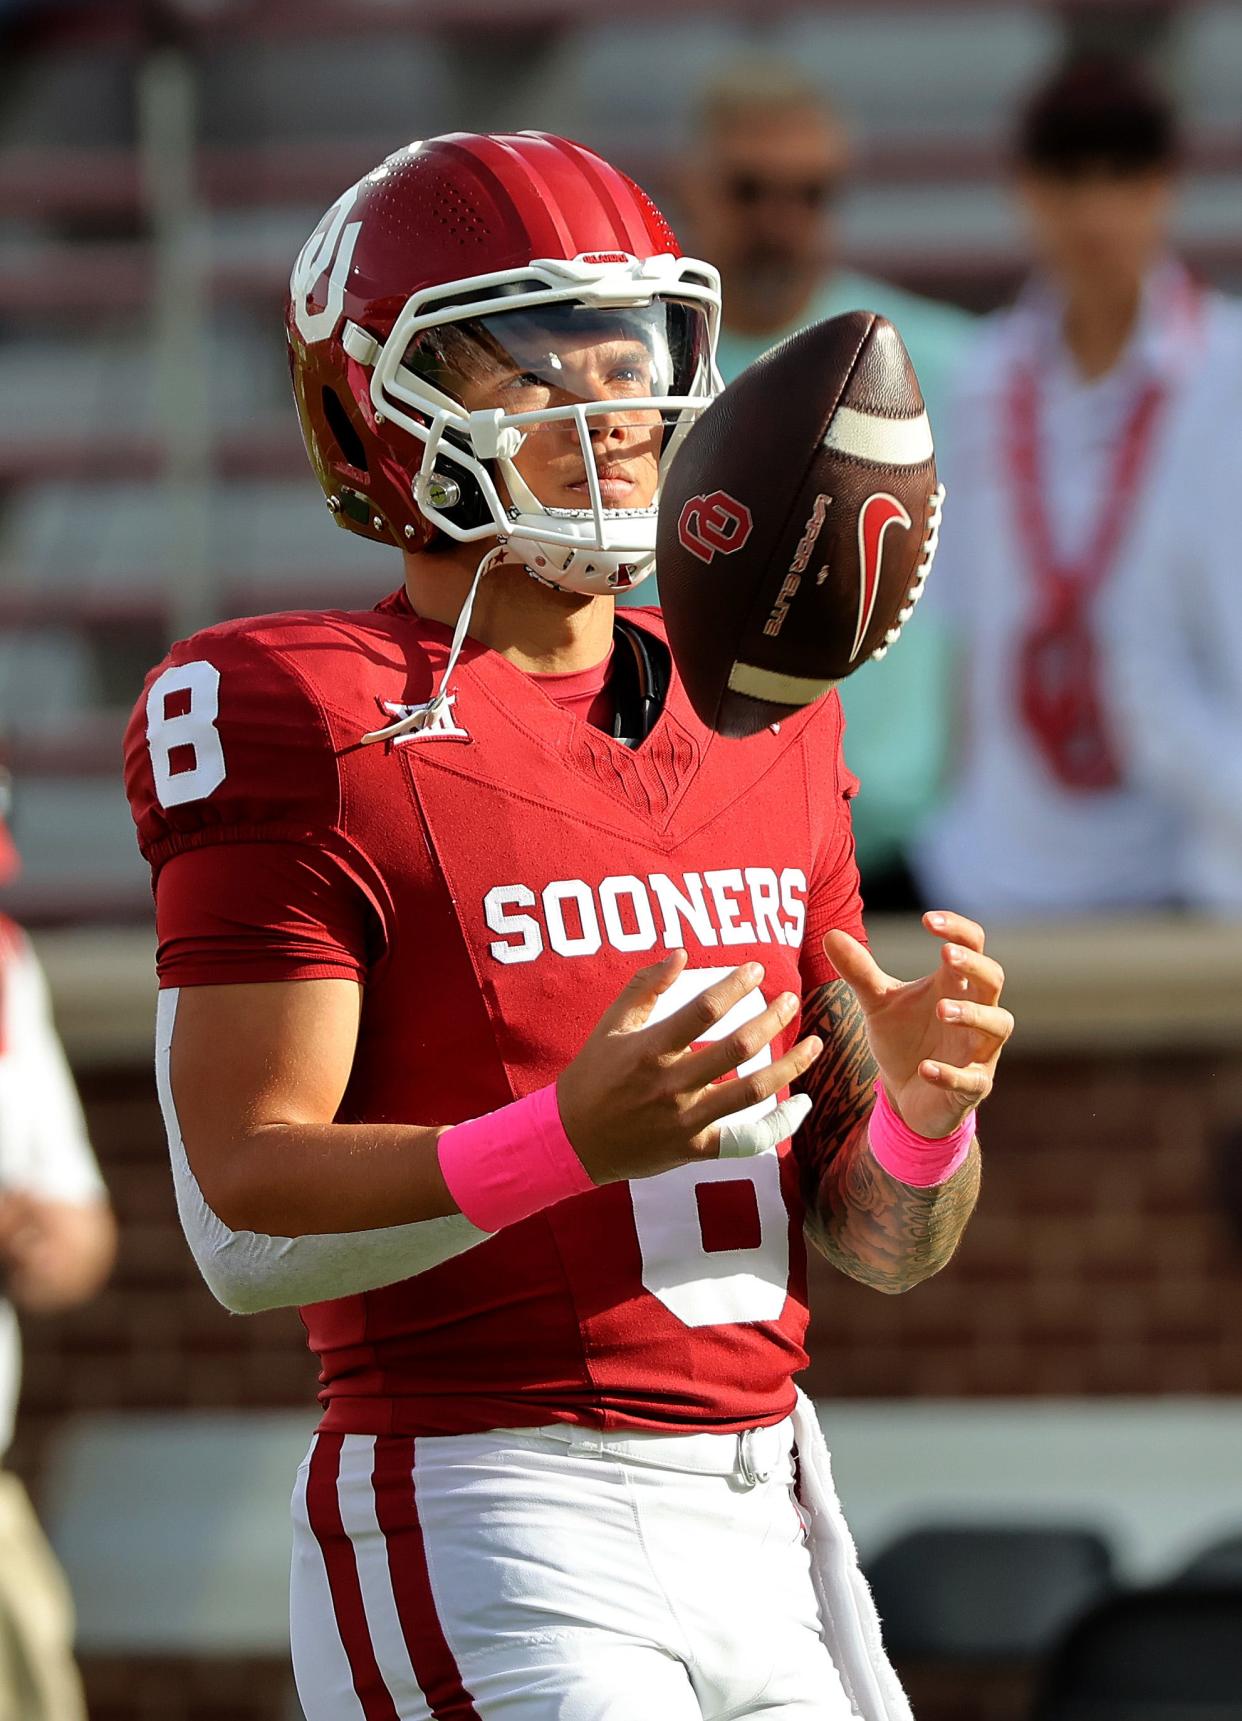 Dillon Gabriel grew up watching Hawaii football's high-powered offense. Now, the OU QB is about to pass one of his childhood heroes.